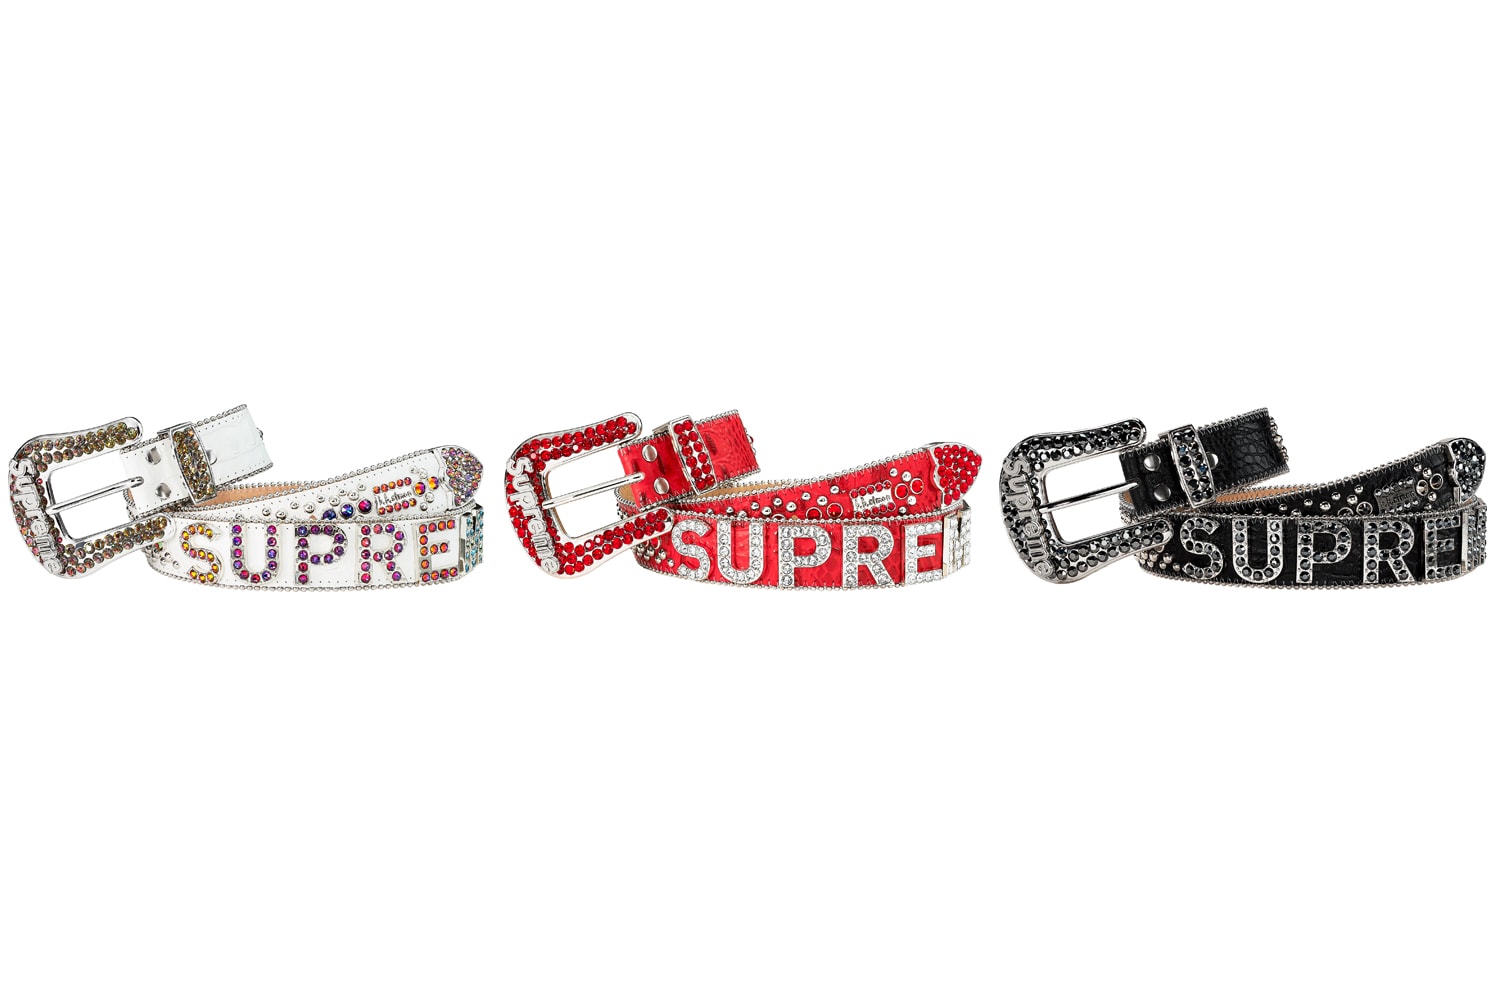 Supreme Spring Summer 2020 Week 3 Release List Palace 5 Fucking Awesome aka Six fragment design Alltimers Nike The North Face GYAKUSOU maharishi Andy Warhol ROSE IN GOOD FAITH